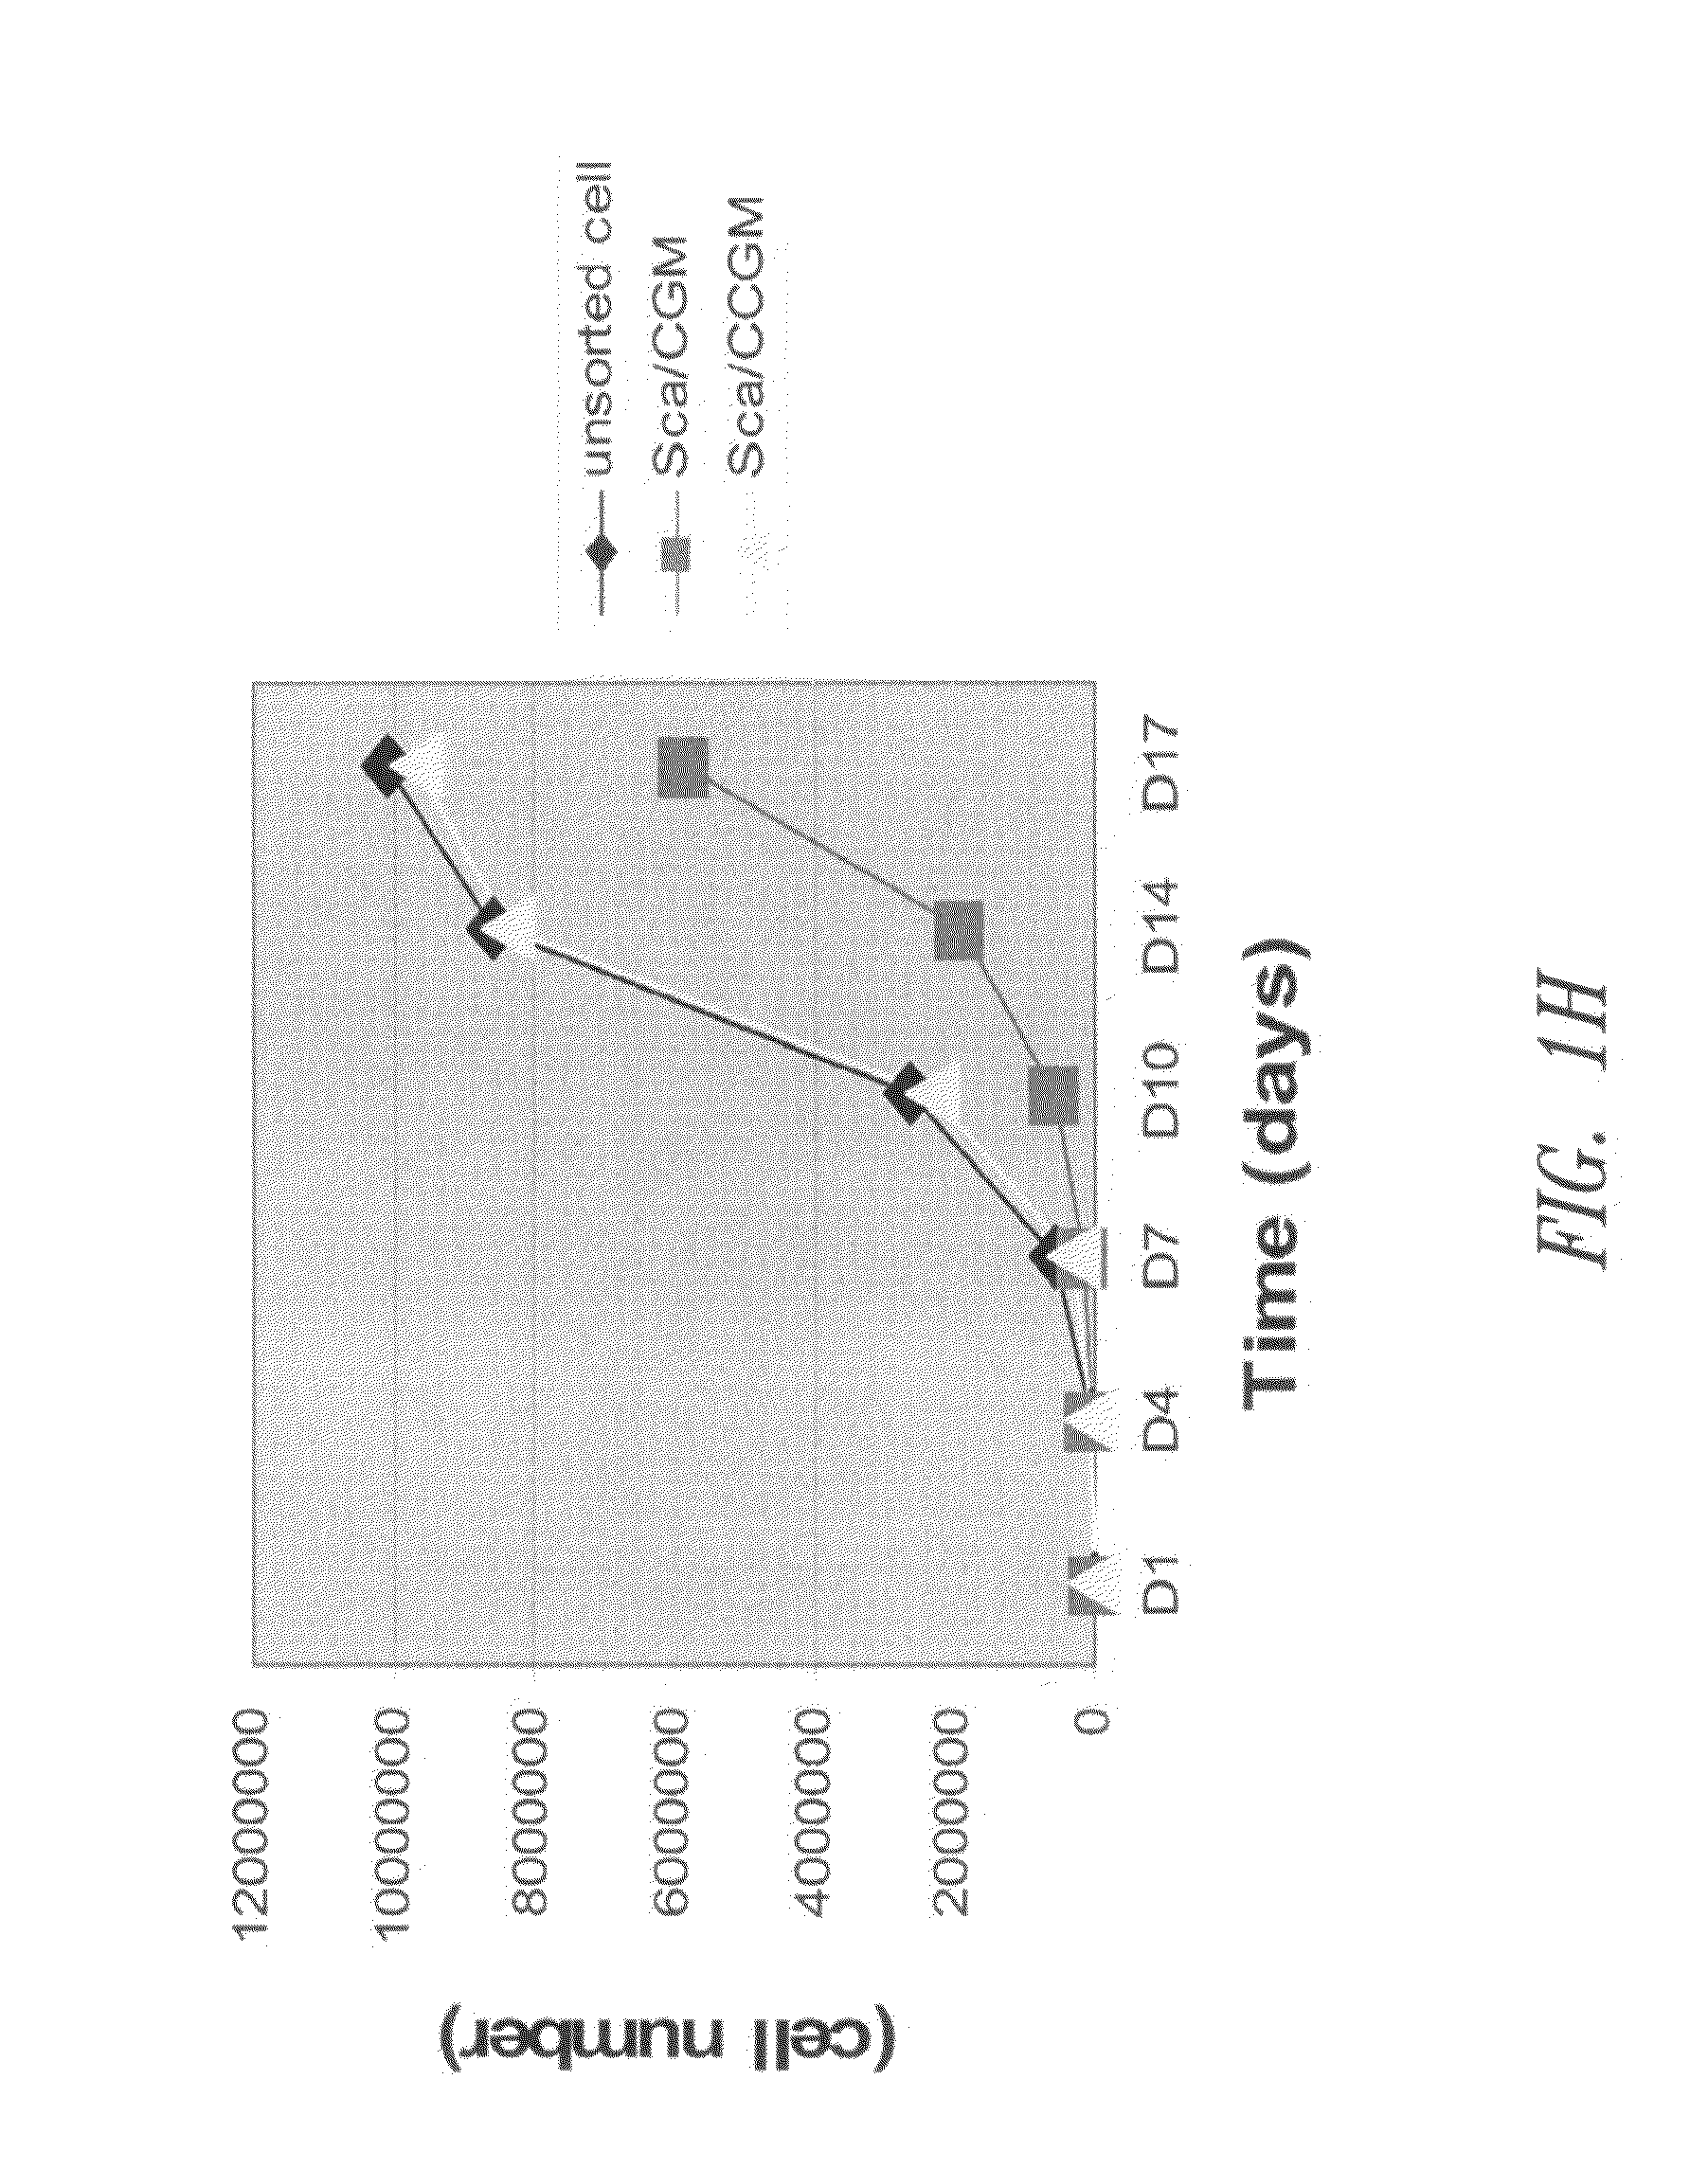 Enriched stem cell and progenitor cell populations, and methods of producing and using such populations